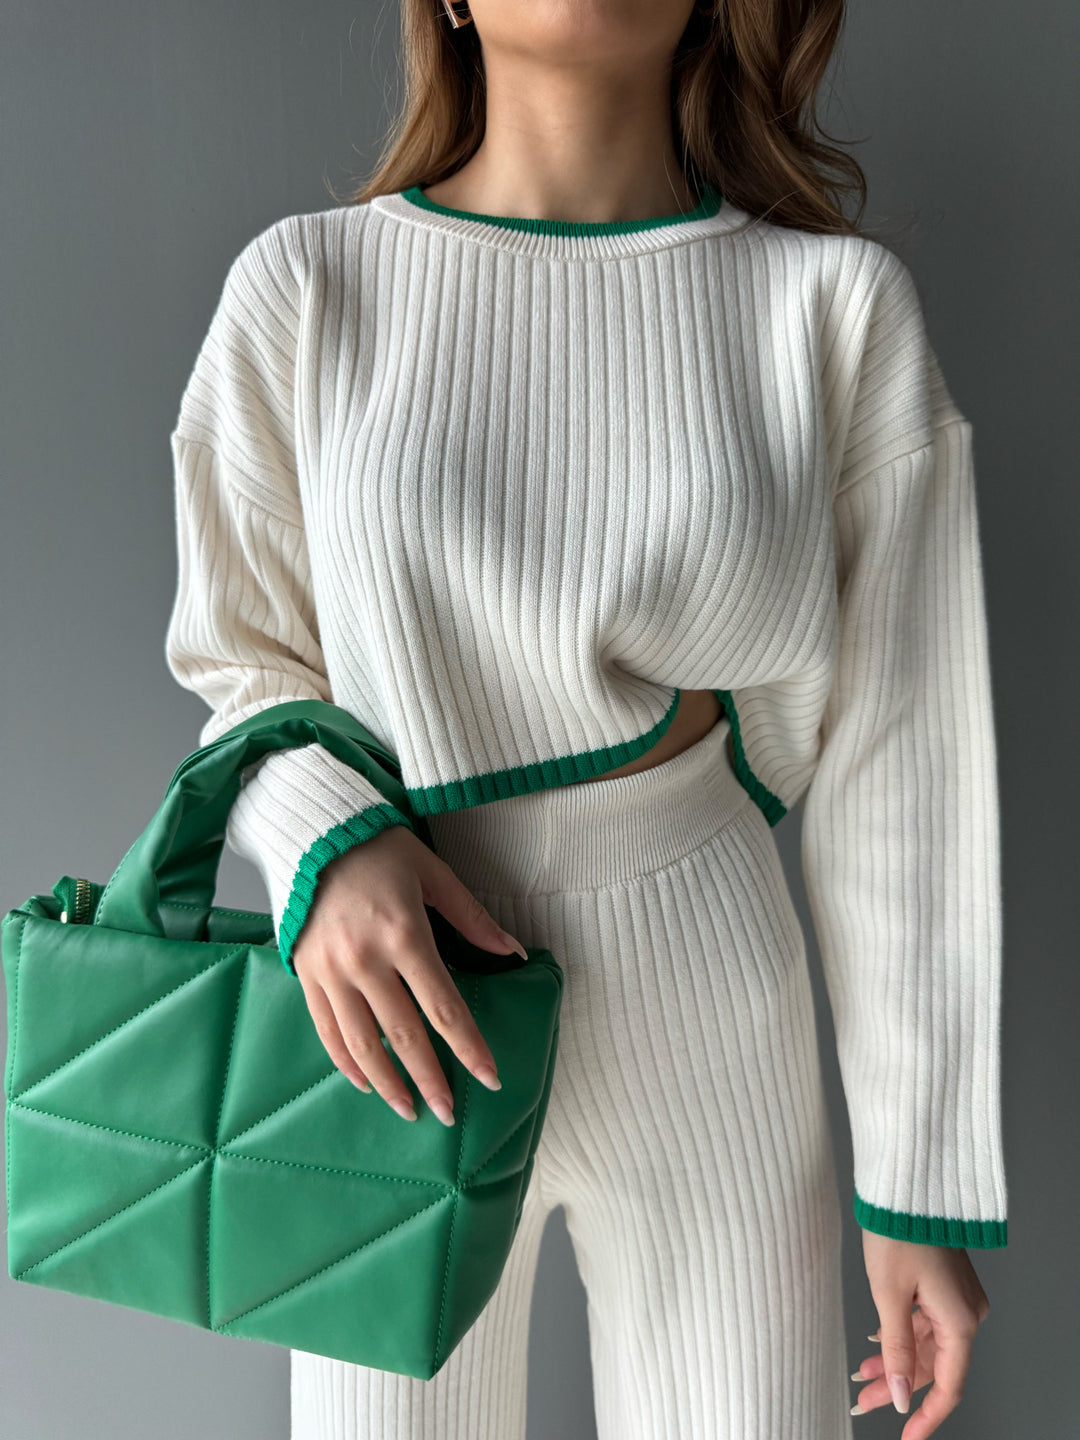 Short Details Knit Pullover - Creme and Green